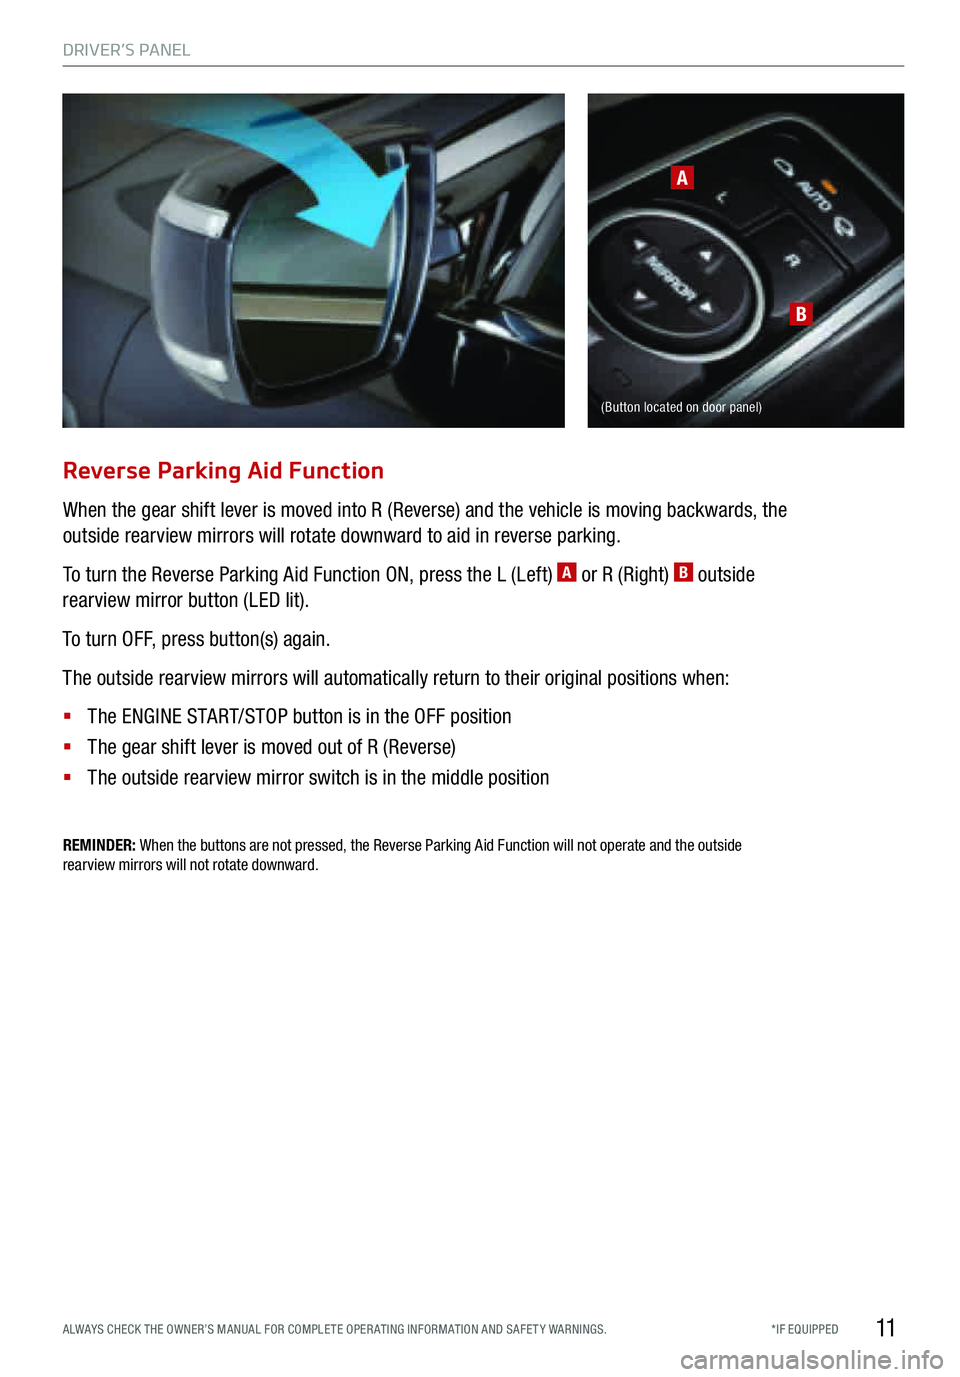 KIA K900 2016  Features and Functions Guide DRIVER’S PA NEL
11*IF EQUIPPED  
A LWAYS  CHECK THE OWNER’S  MANUAL FOR COMPLETE  OPERATING INFORMATION  AND SAFETY  WARNINGS.
REMINDER:  When  the buttons  are not pressed, the  Reverse Parking A